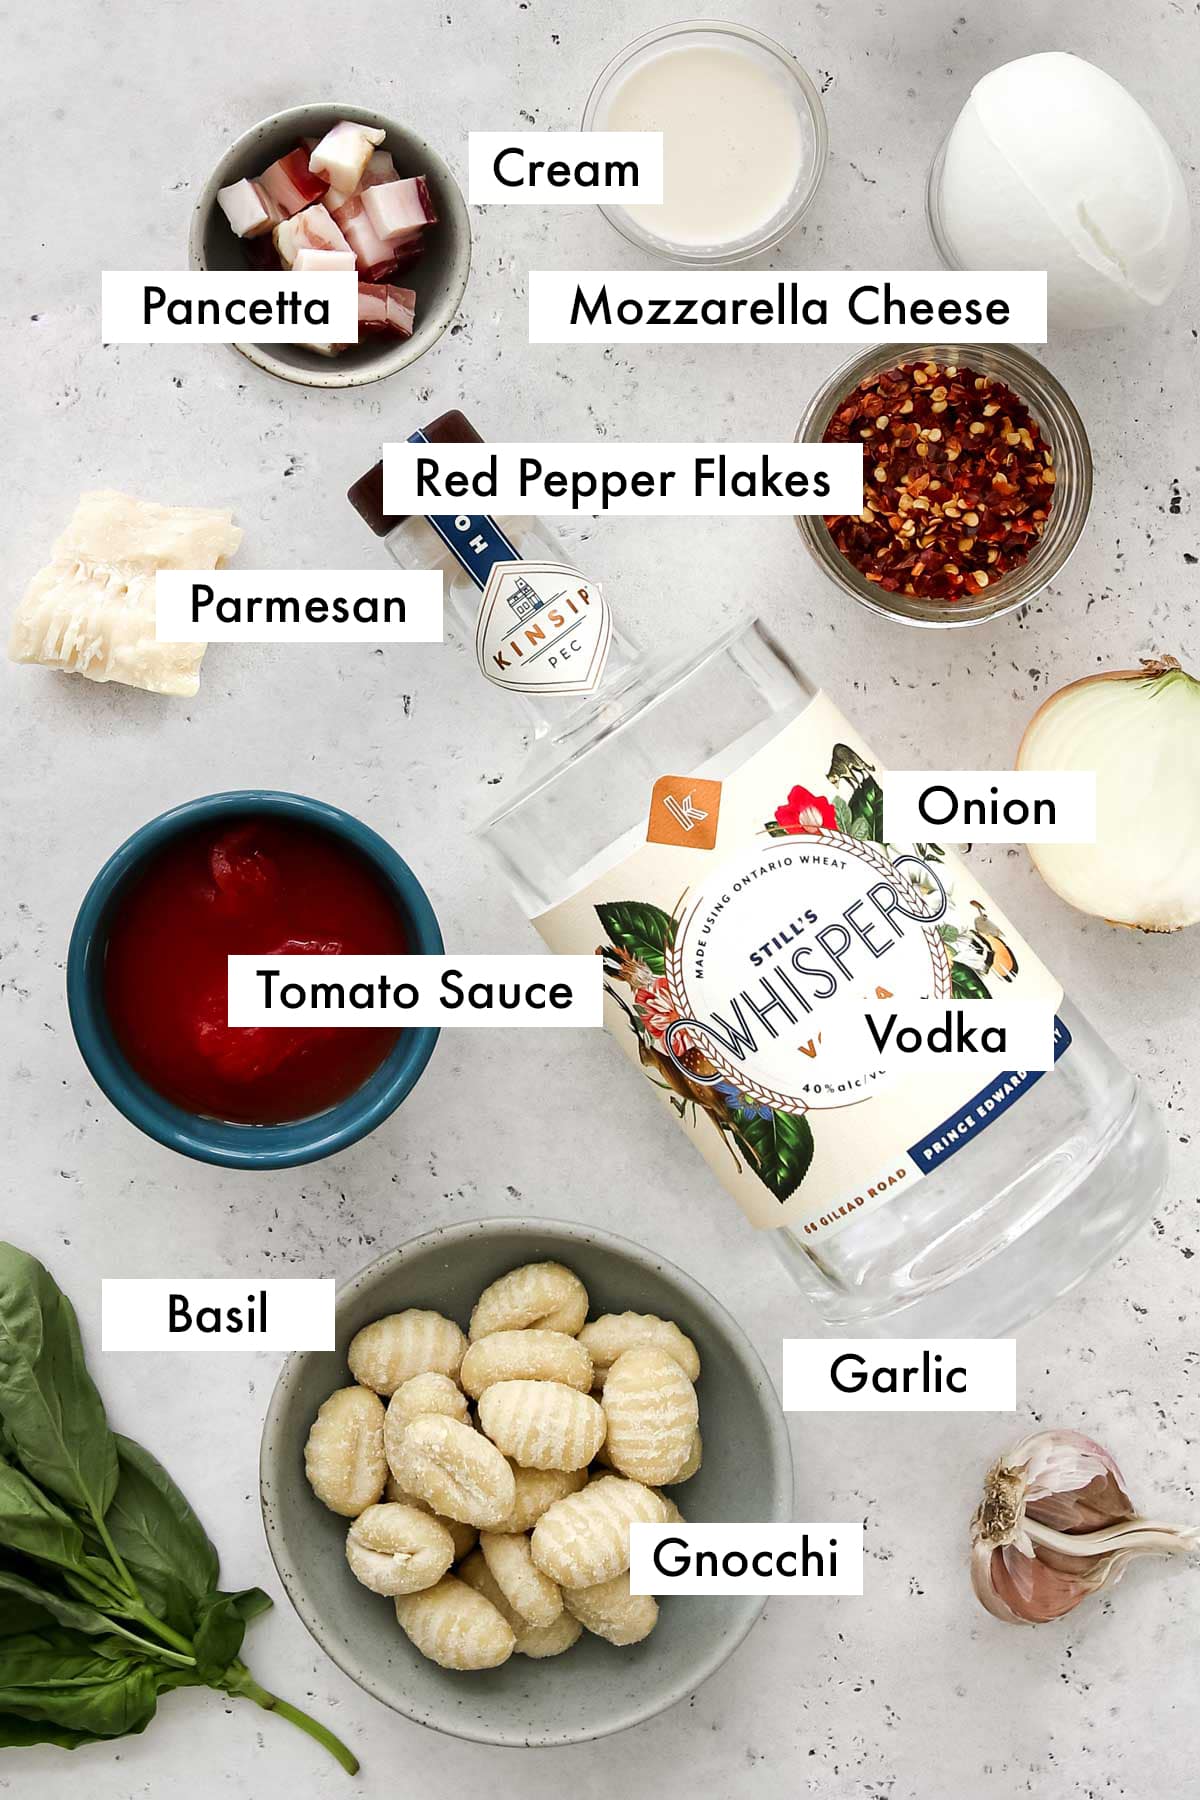 ingredients to make gnocchi with vodka sauce with text graphic.